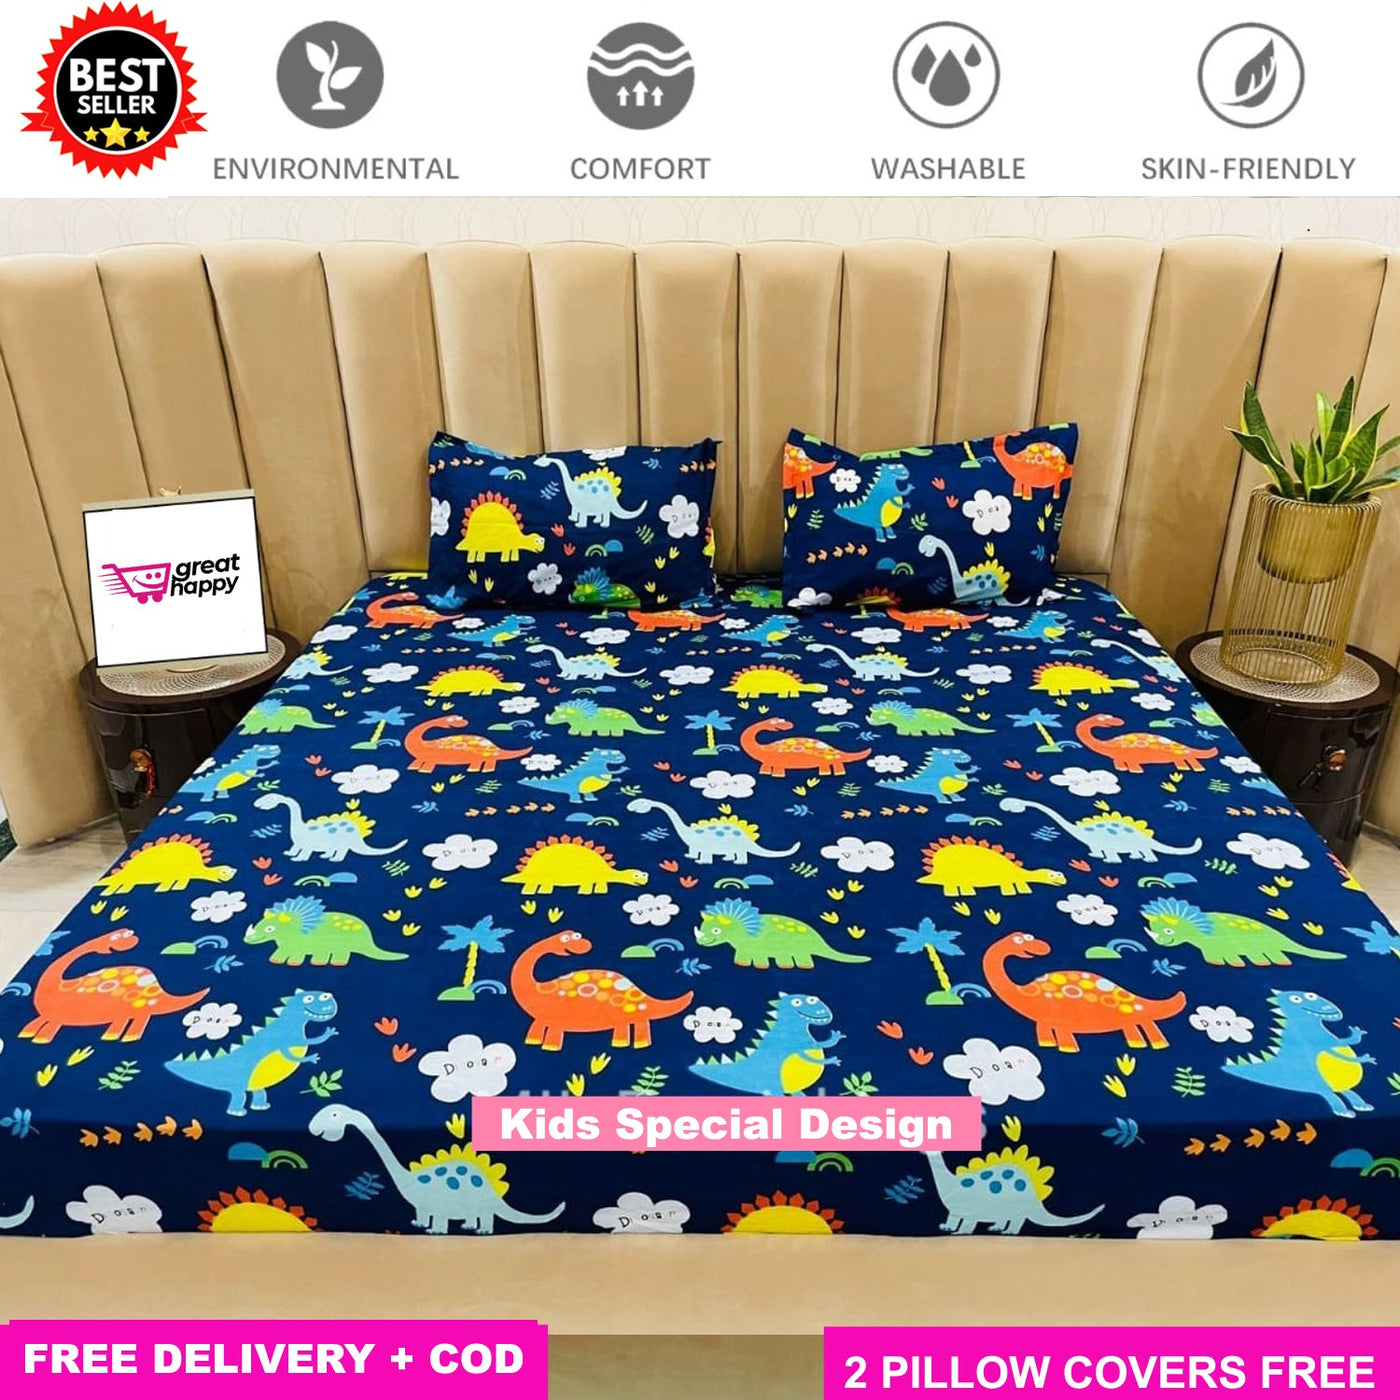 Cotton Elastic Fitted King Size Bedsheet with 2 Pillow Covers - Fits with any Beds & Mattresses Great Happy IN Kids Dragon KING SIZE 